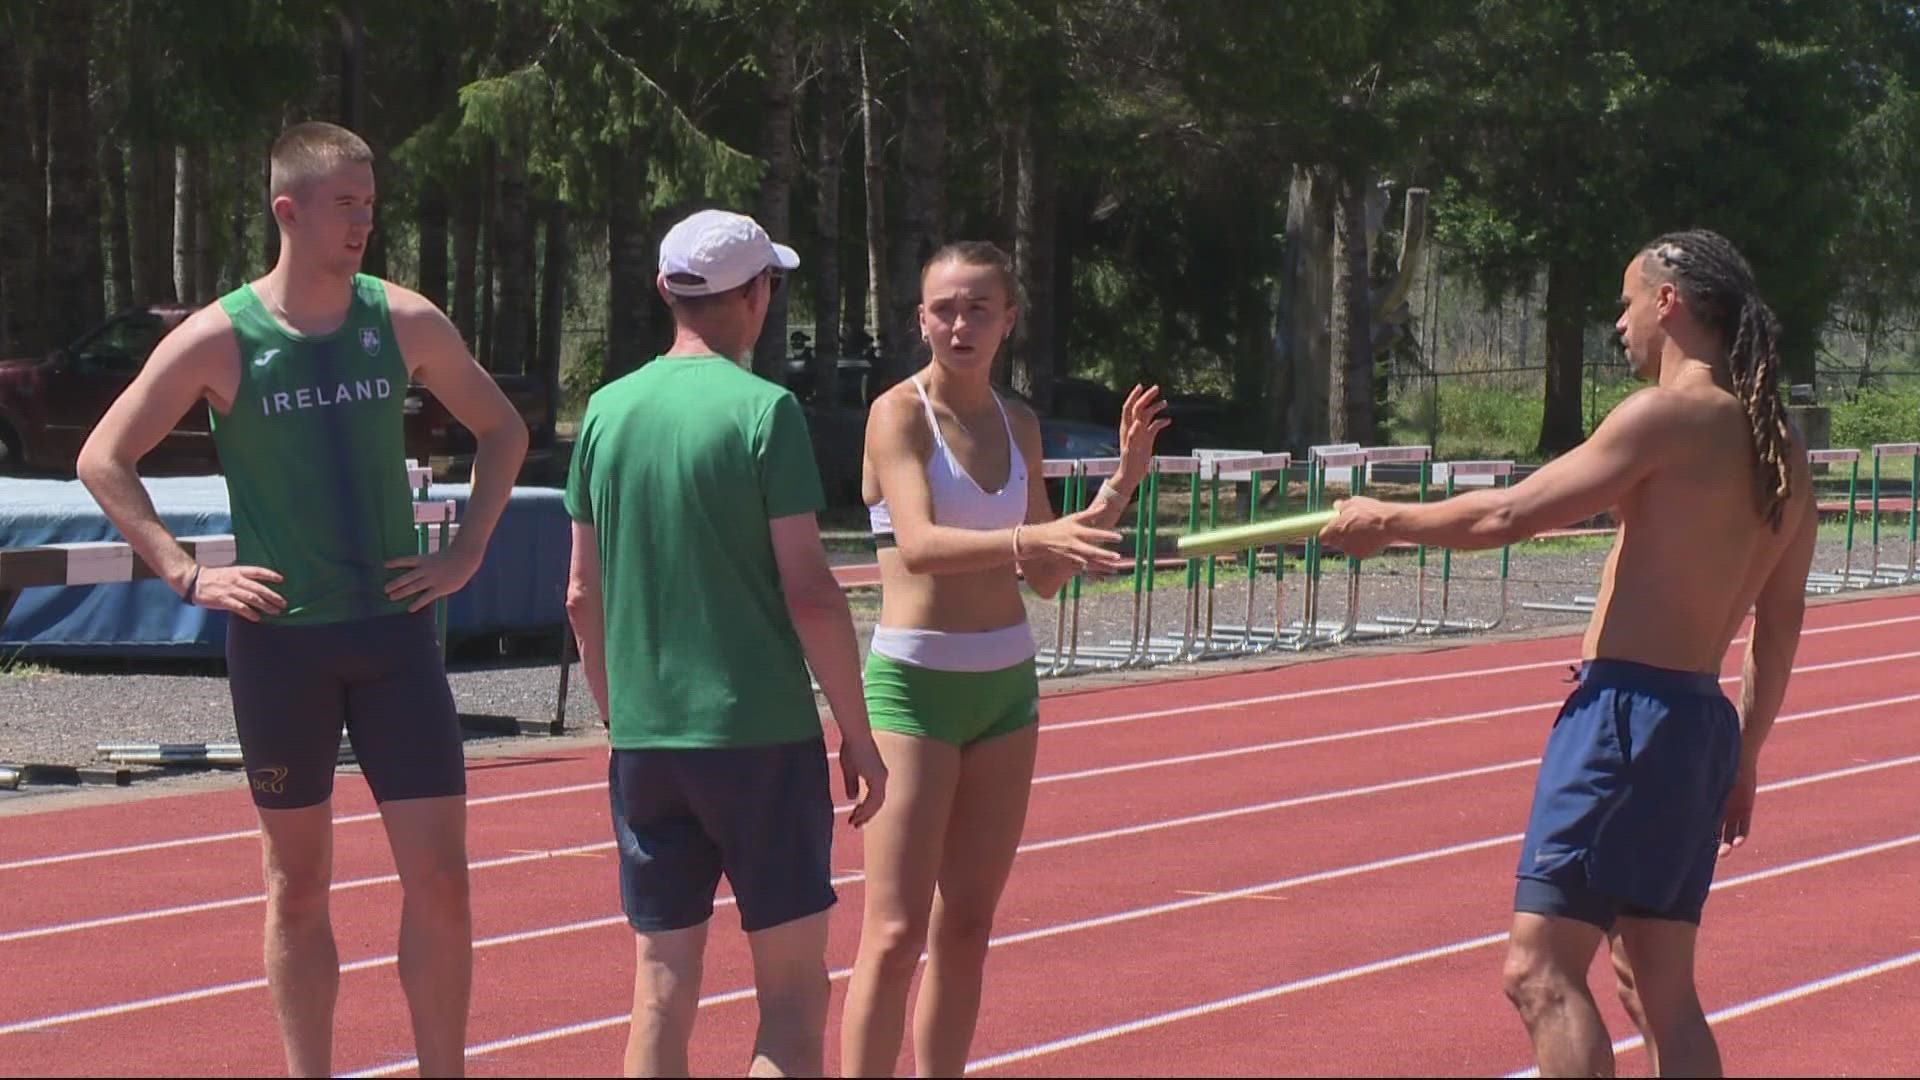 The Irish team has been practicing at McKenzie Community Track for the past week. It's a positive sign for a town still recovering from Oregon's 2020 wildfires.